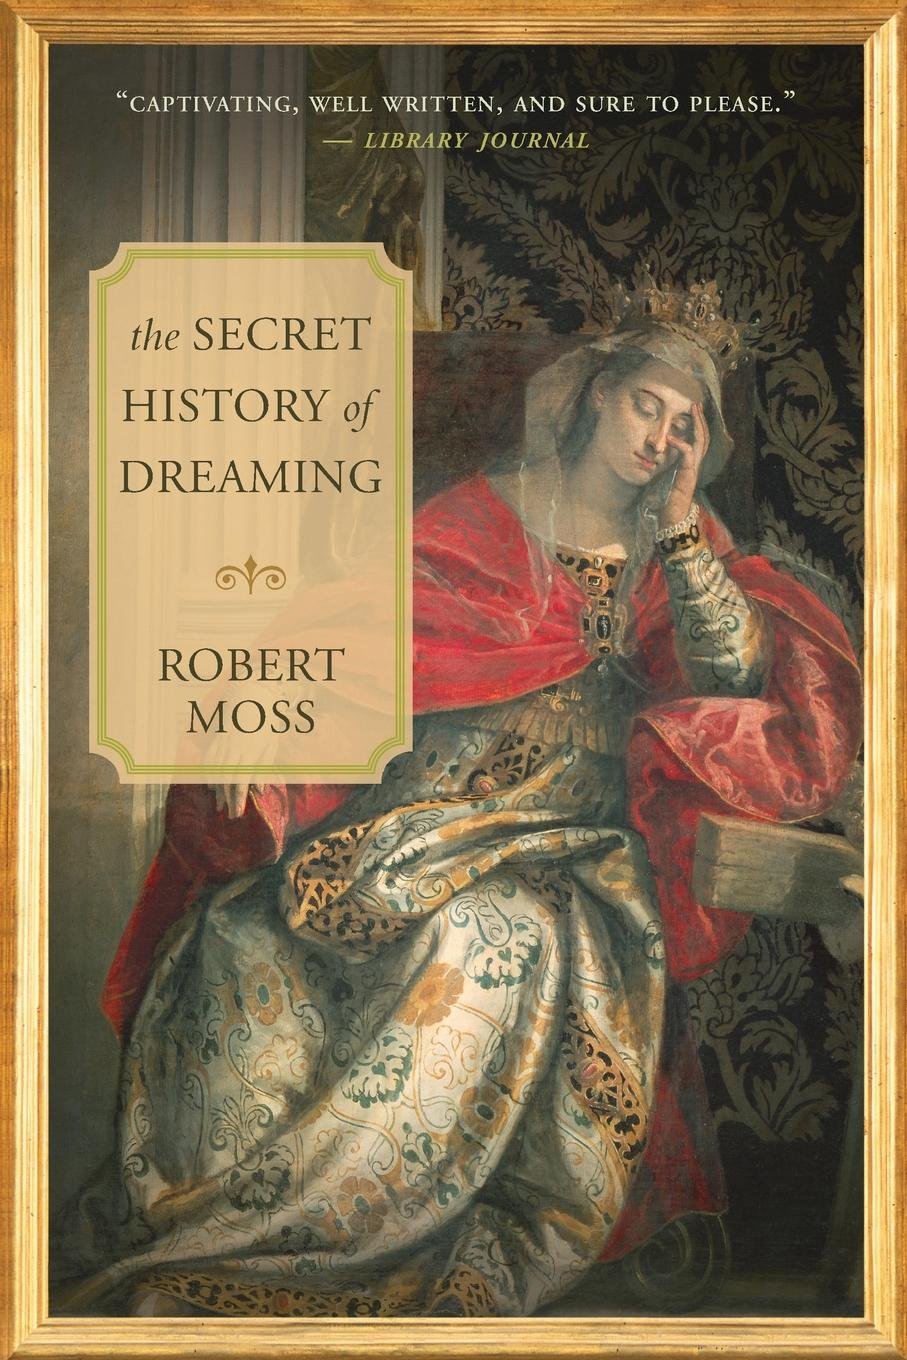 Book Review: The Secret History of Dreaming by Robert Moss